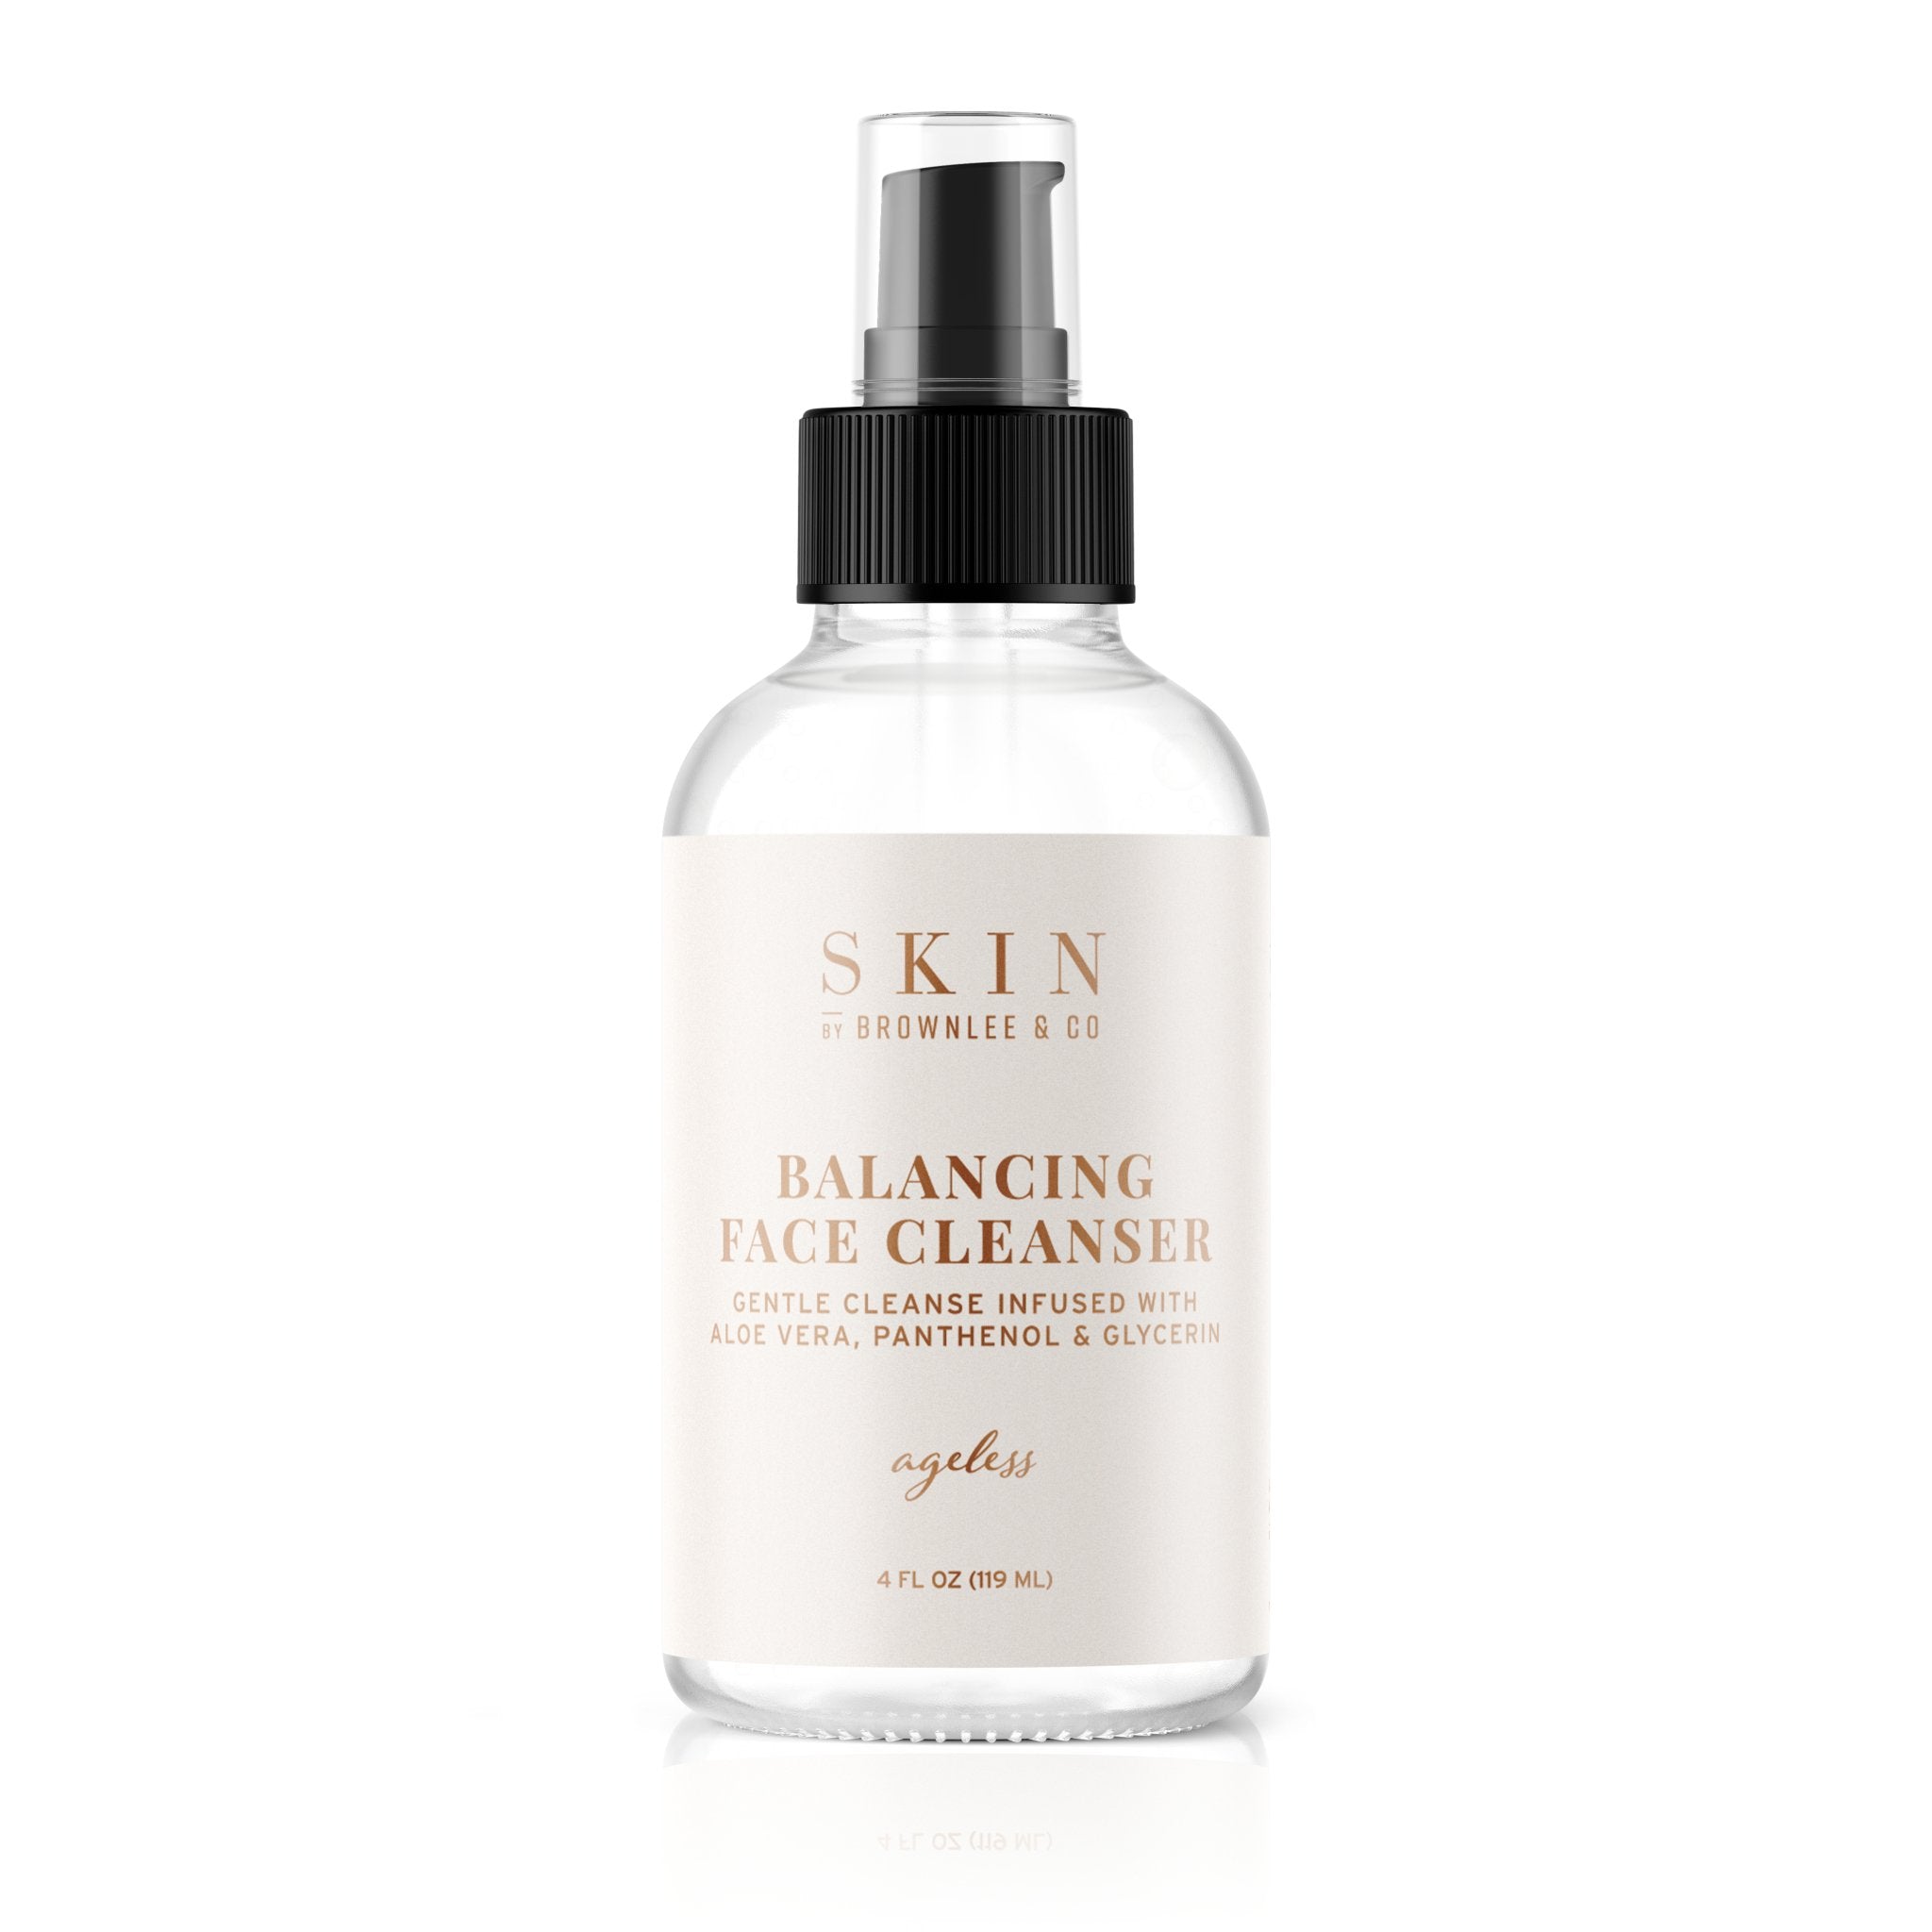 Balancing Face Cleanser - Skin by Brownlee & Co.